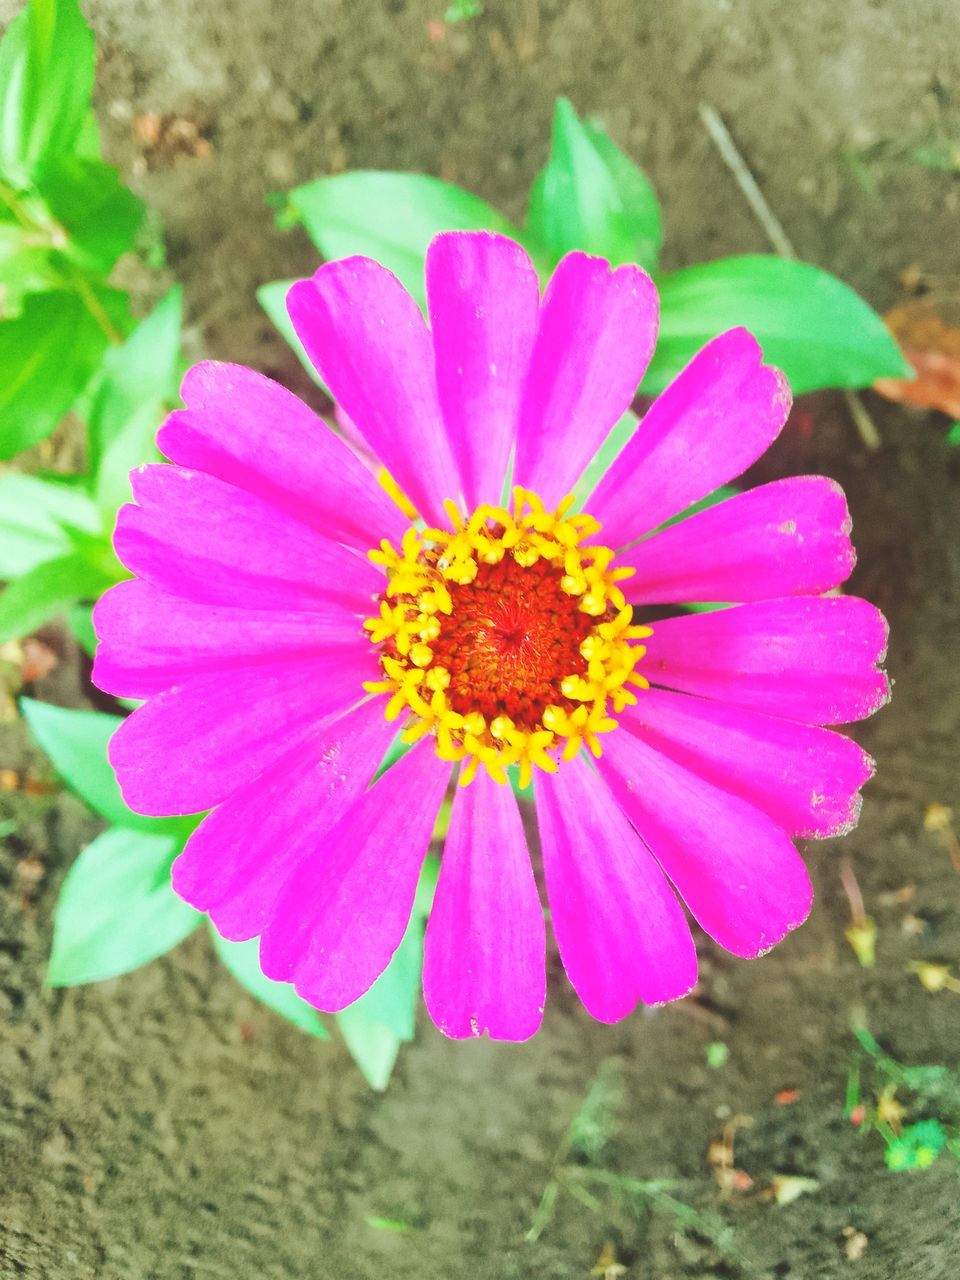 flowering plant, flower, plant, freshness, flower head, beauty in nature, petal, inflorescence, fragility, close-up, pink, growth, pollen, nature, macro photography, focus on foreground, garden cosmos, day, yellow, outdoors, no people, high angle view, land, wildflower, daisy, directly above